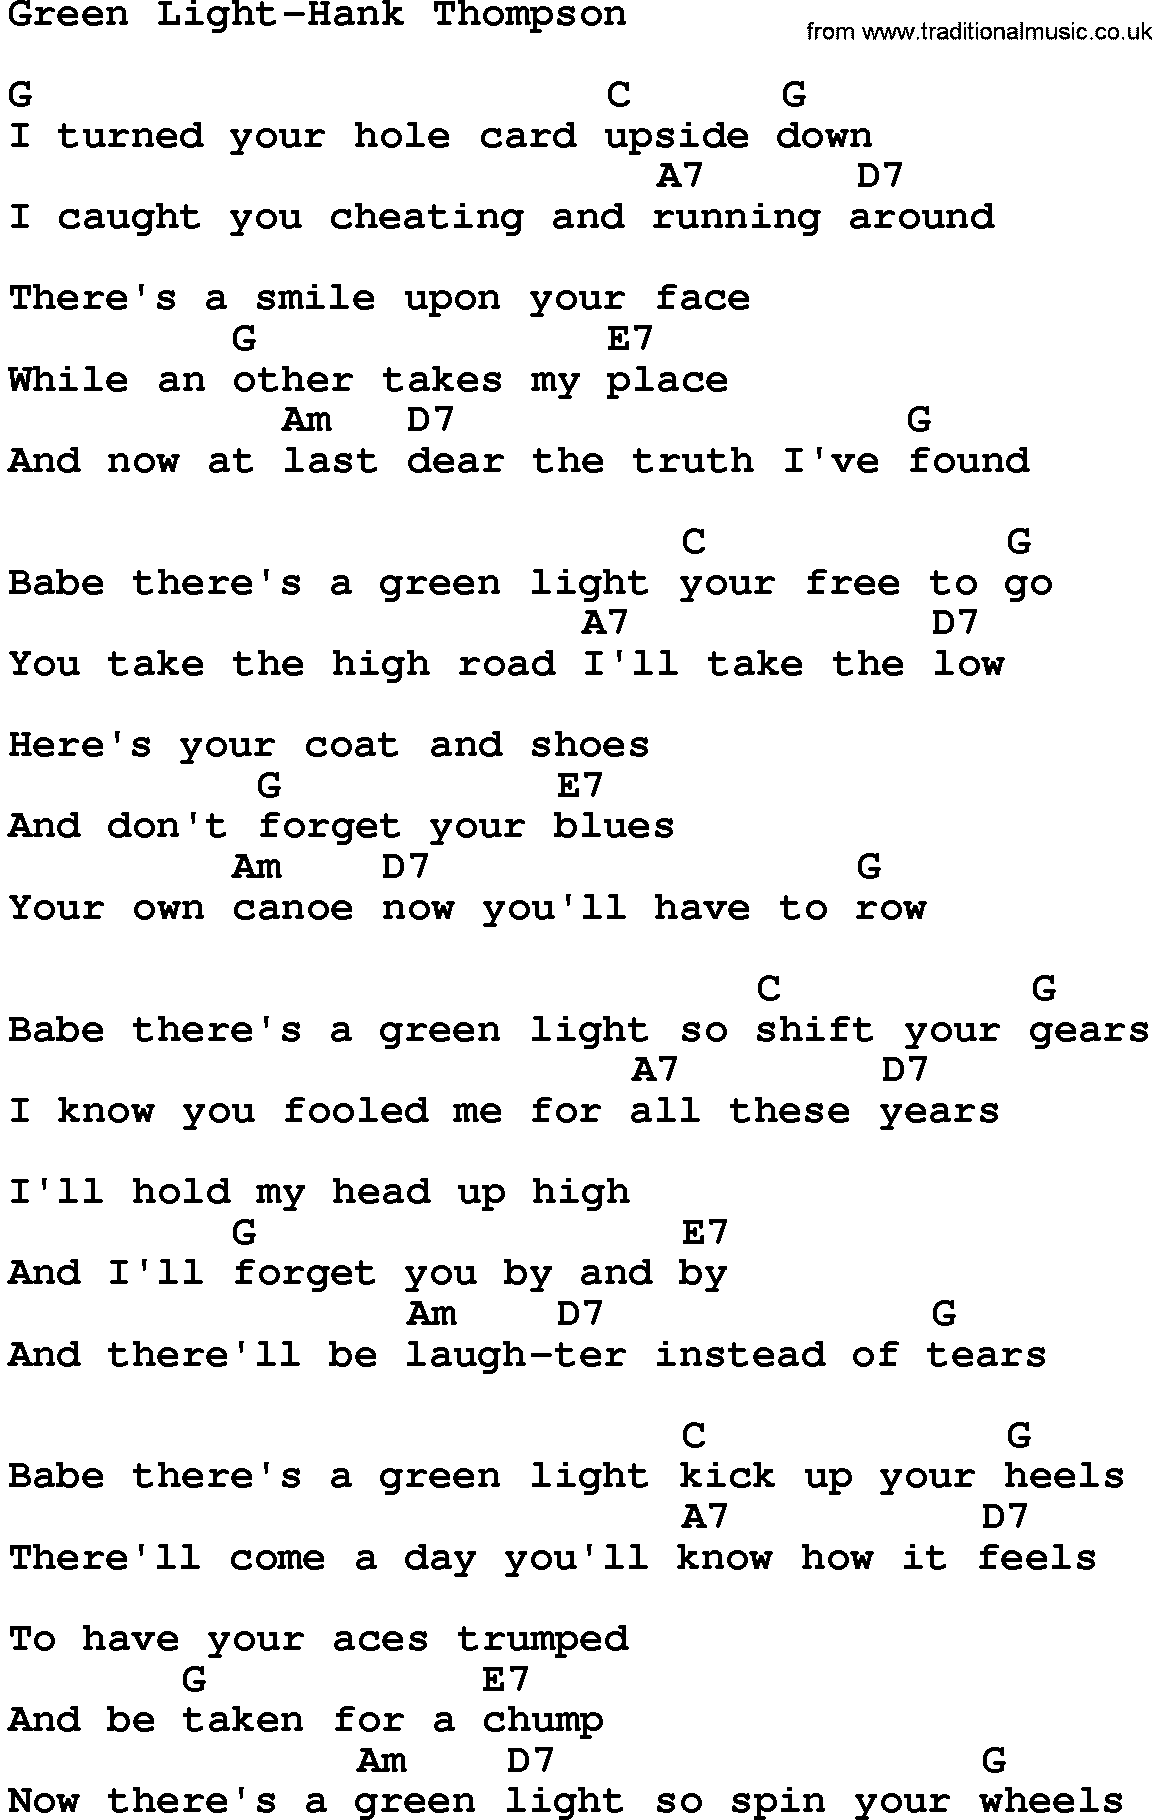 Country music song: Green Light-Hank Thompson lyrics and chords